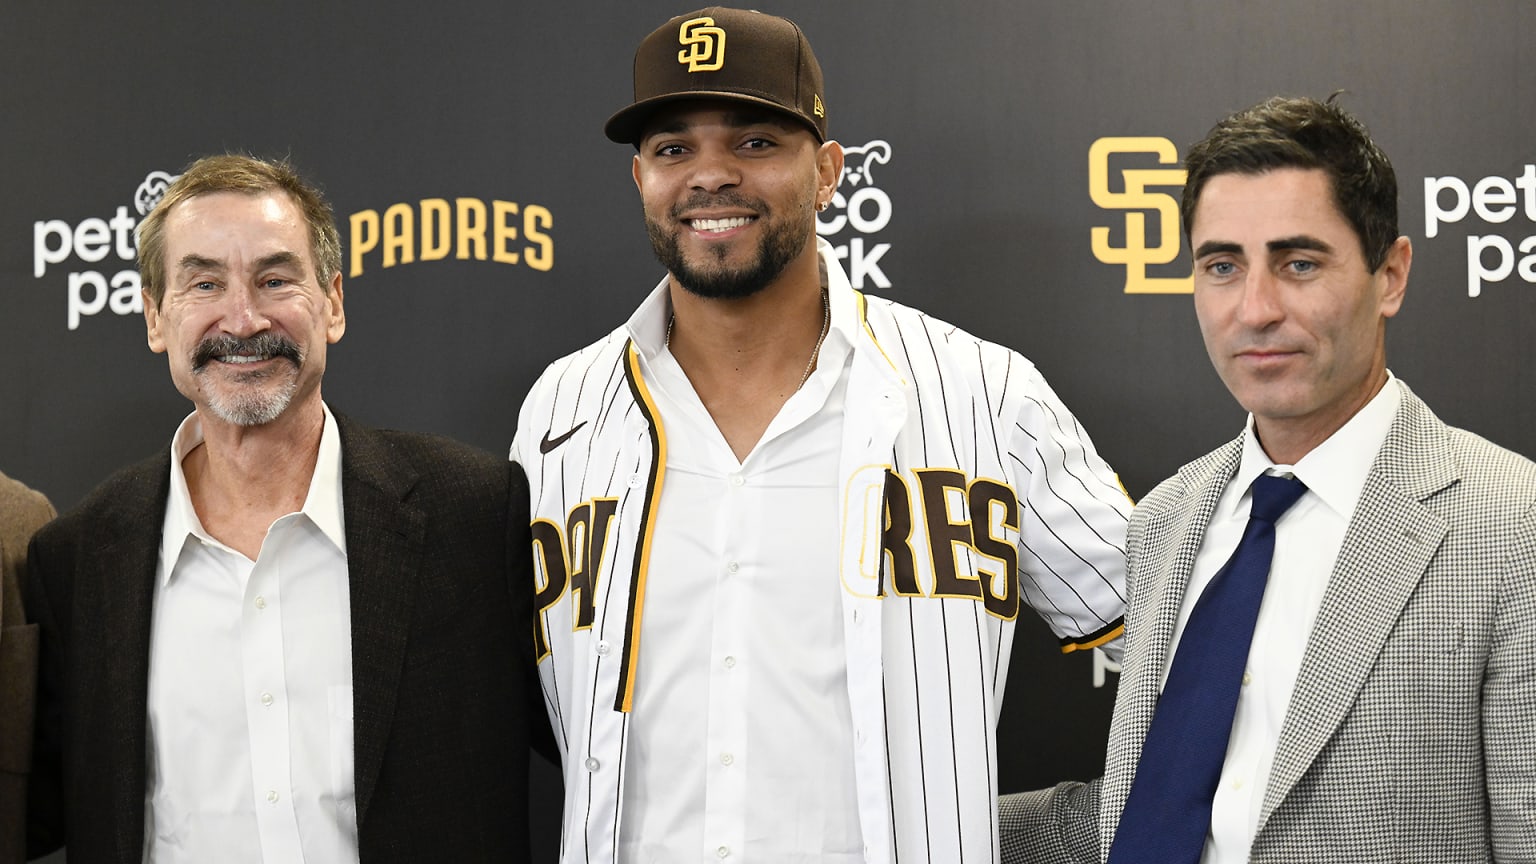 Xander Bogaerts is flanked by Padres chairman Peter Seidler and GM A.J. Preller